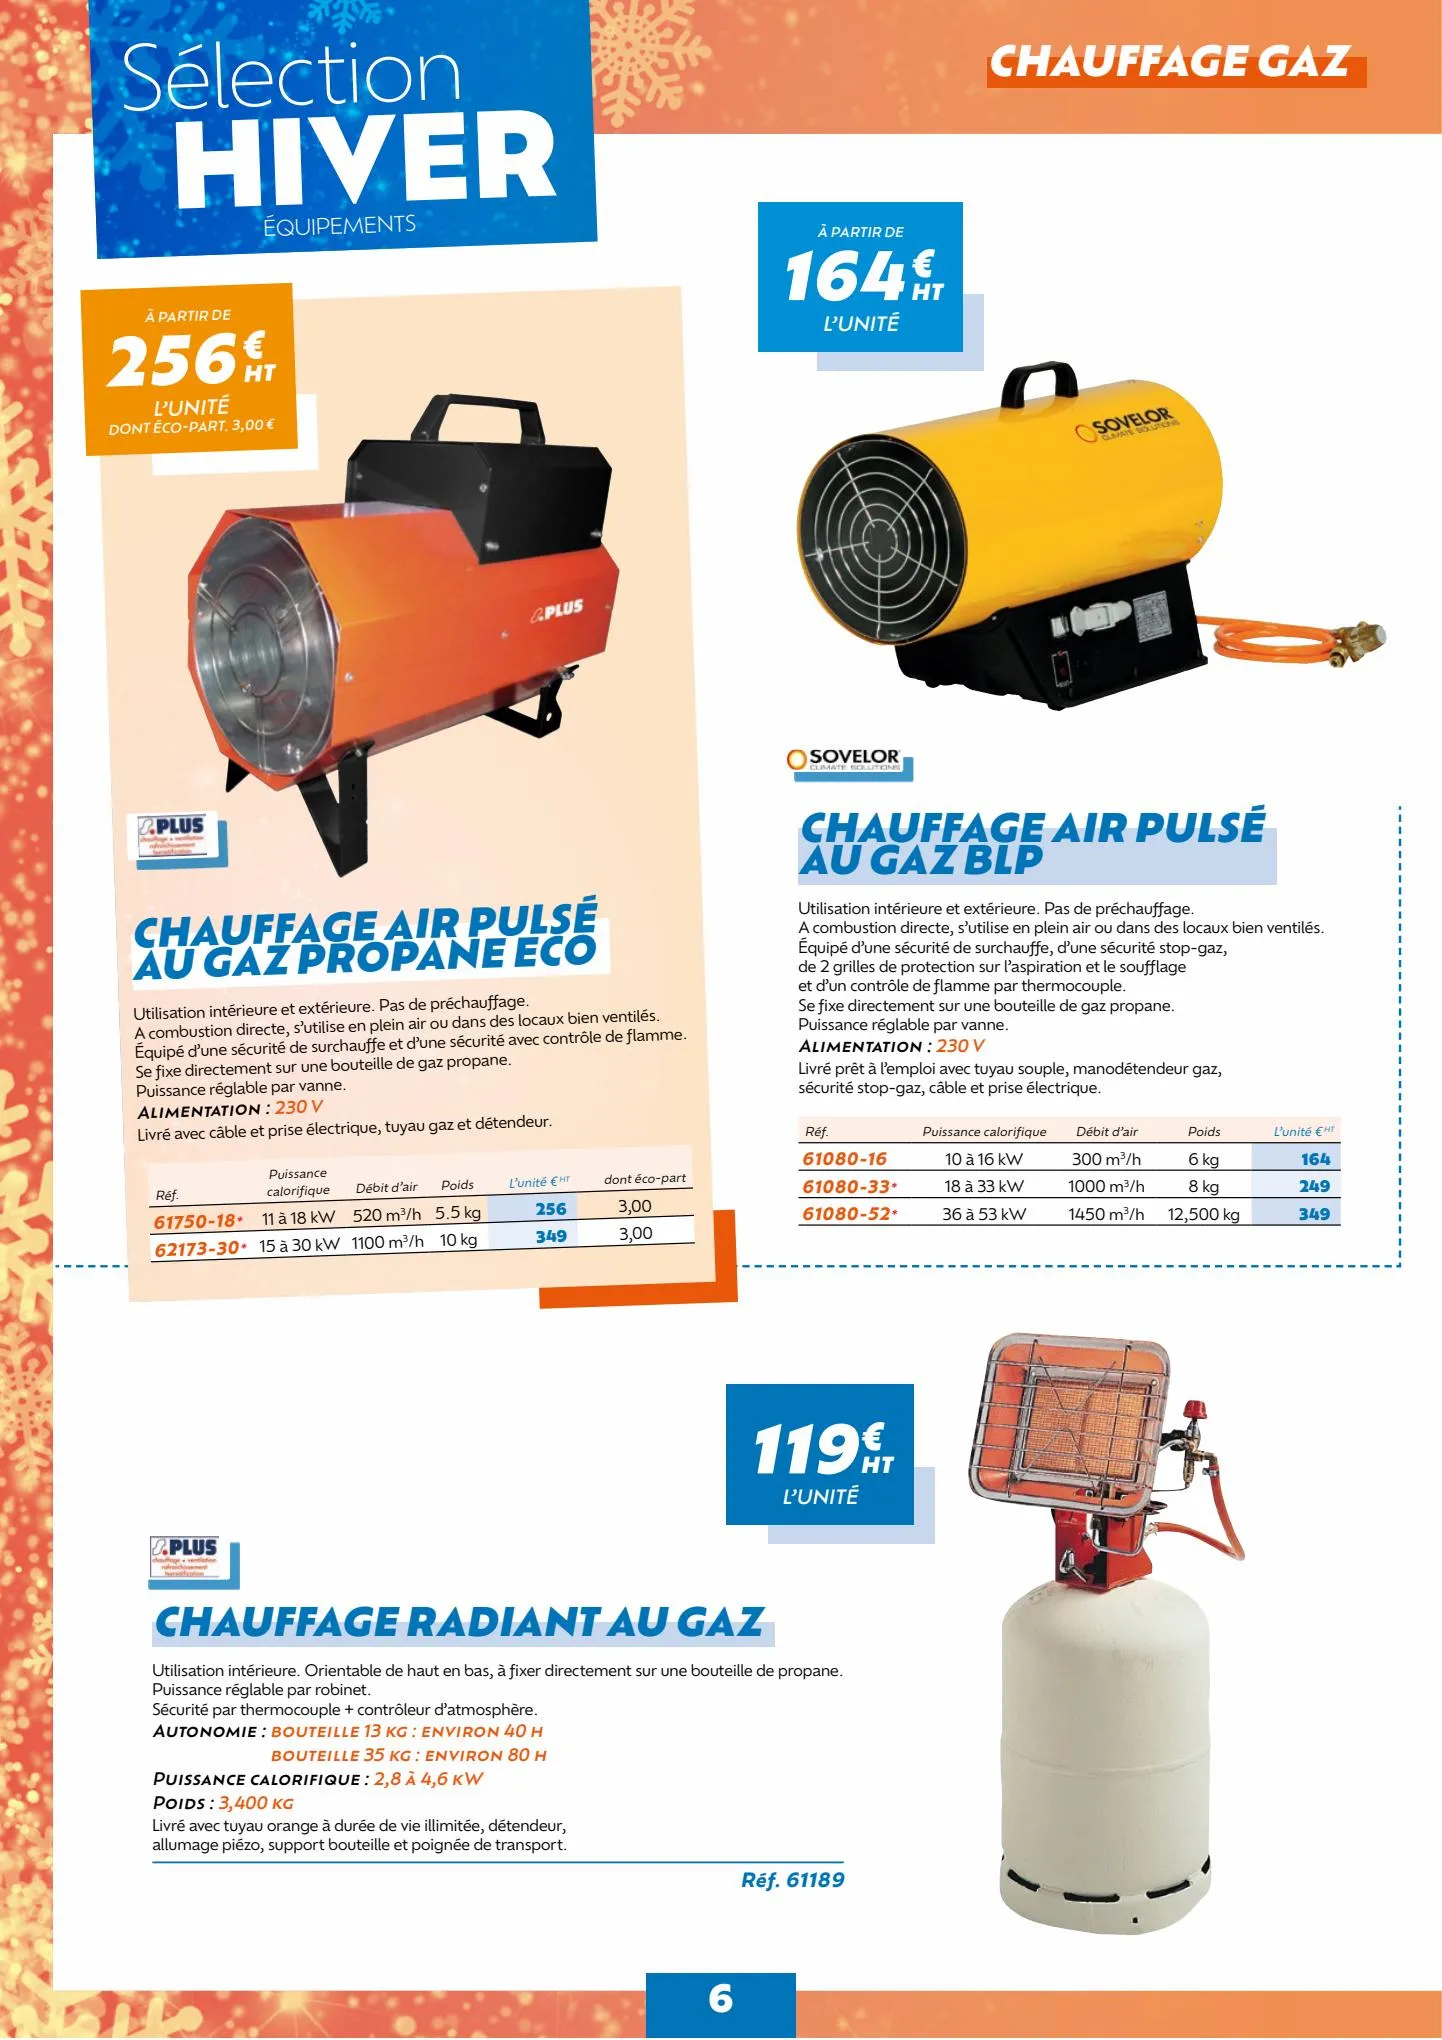 Catalogue Selection hiver 2022 equipements, page 00006